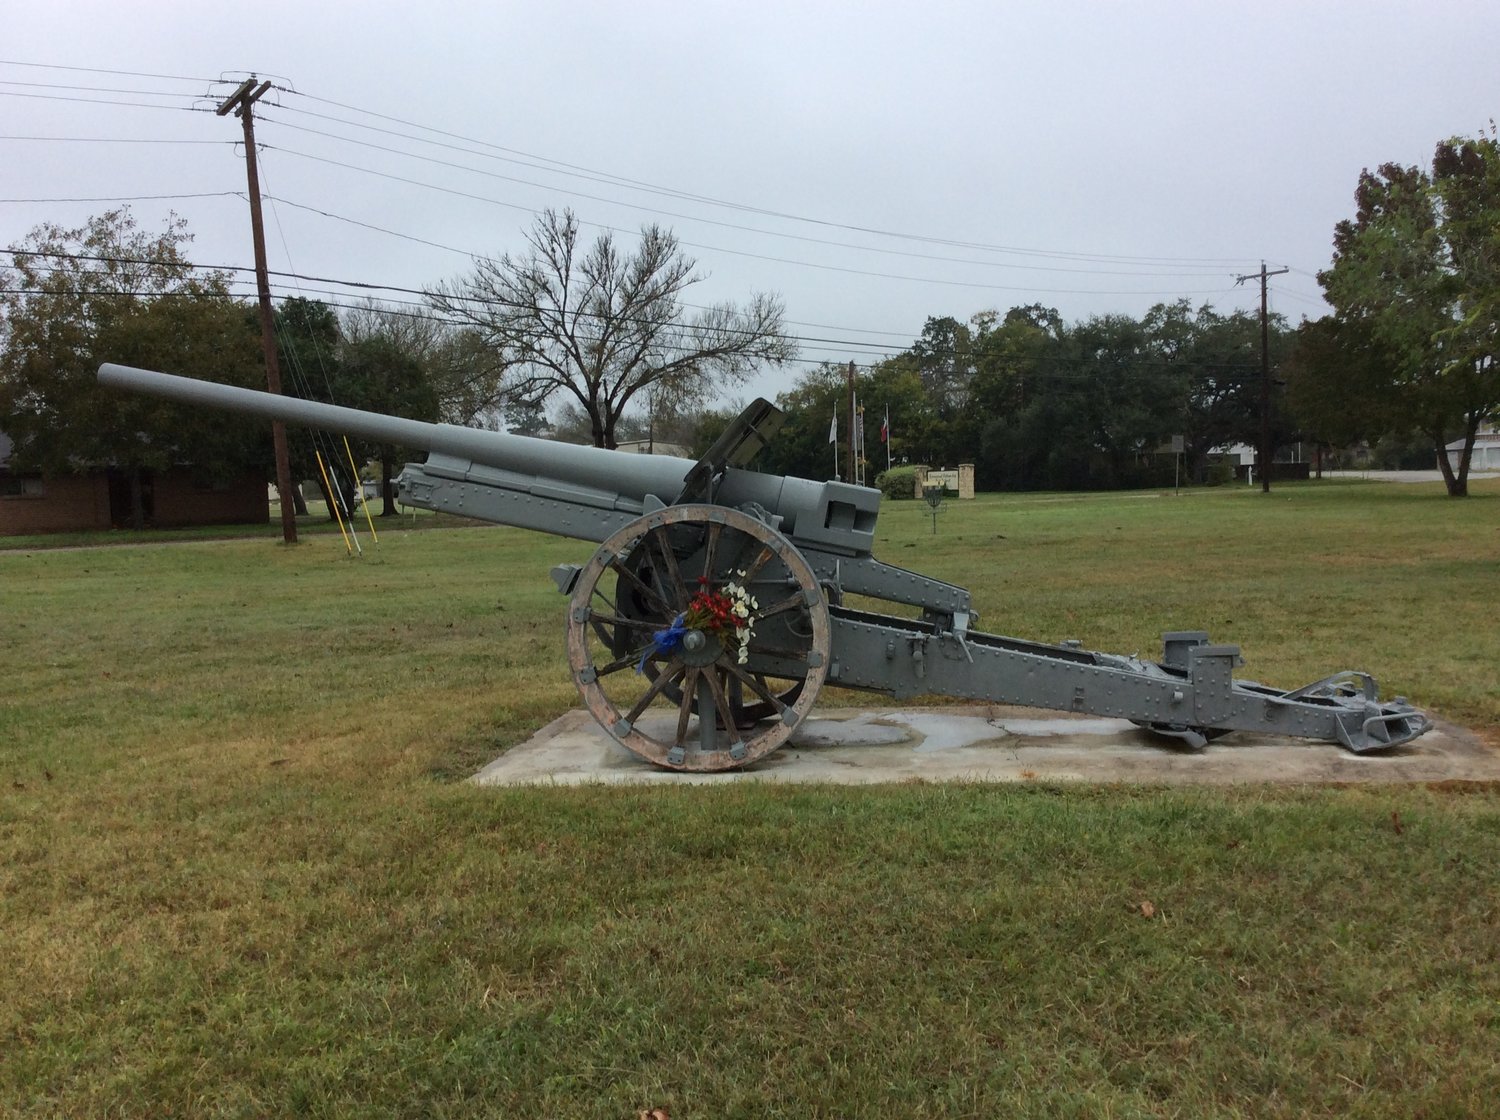 A World War I commemoration will be held at the old German cannon at the 400 block of Fair St. on Sunday. Several other activities celebrating Veterans Day will be held in Gonzales and Nixon over the next several days.